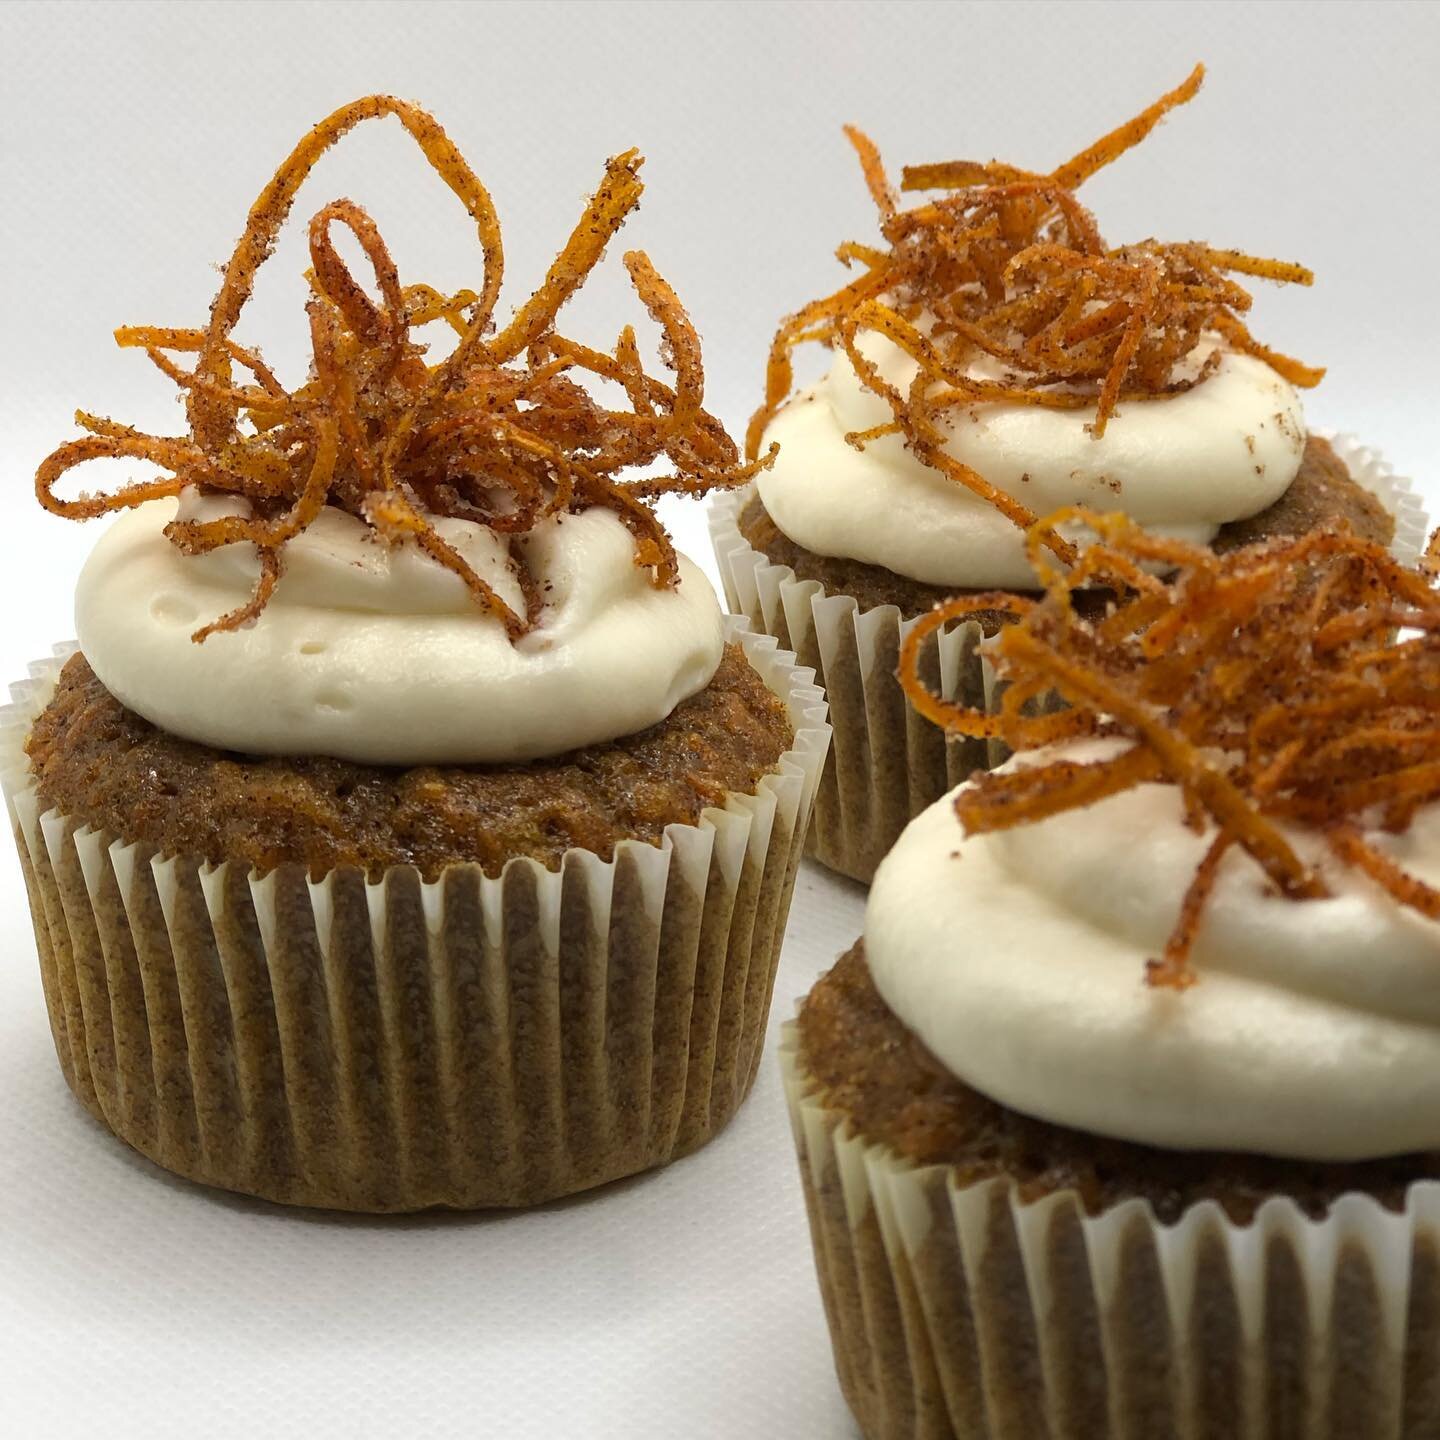 A personal favorite of mine: #carrot cupcakes! *drool*
Spiced carrot cake, apricot preserves, cream  cheese frosting and fried cinnamon carrots. THE best.

#cupcakes #carrotcupcakes #sweets #sweetsofinstagram #yummy #nomnomnom #cupcakesofinstagram #c